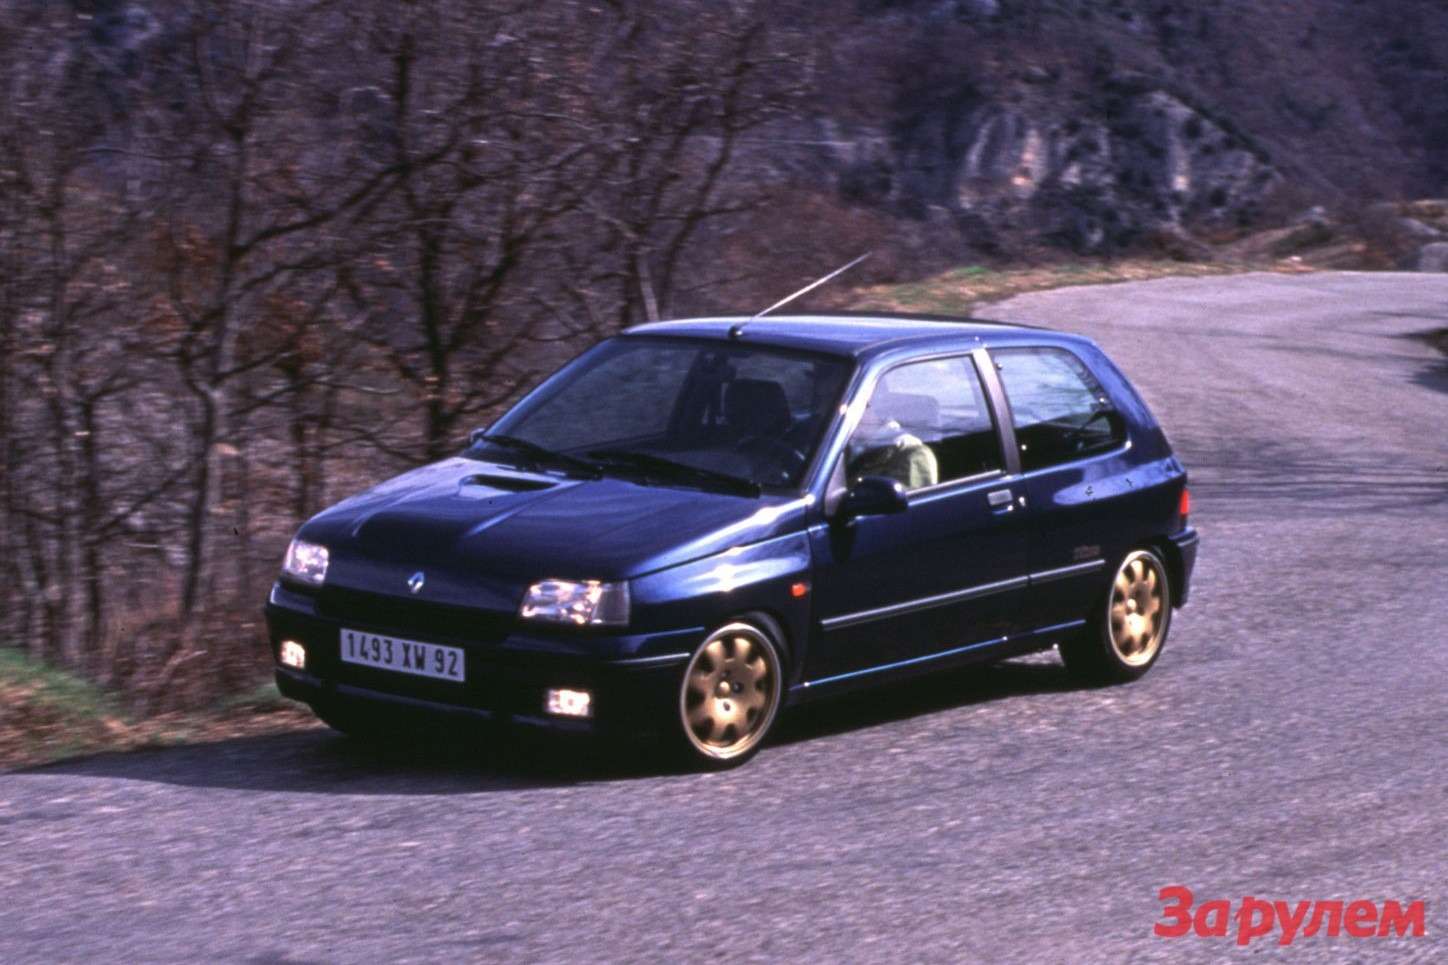 Renault Clio Williams side-front view